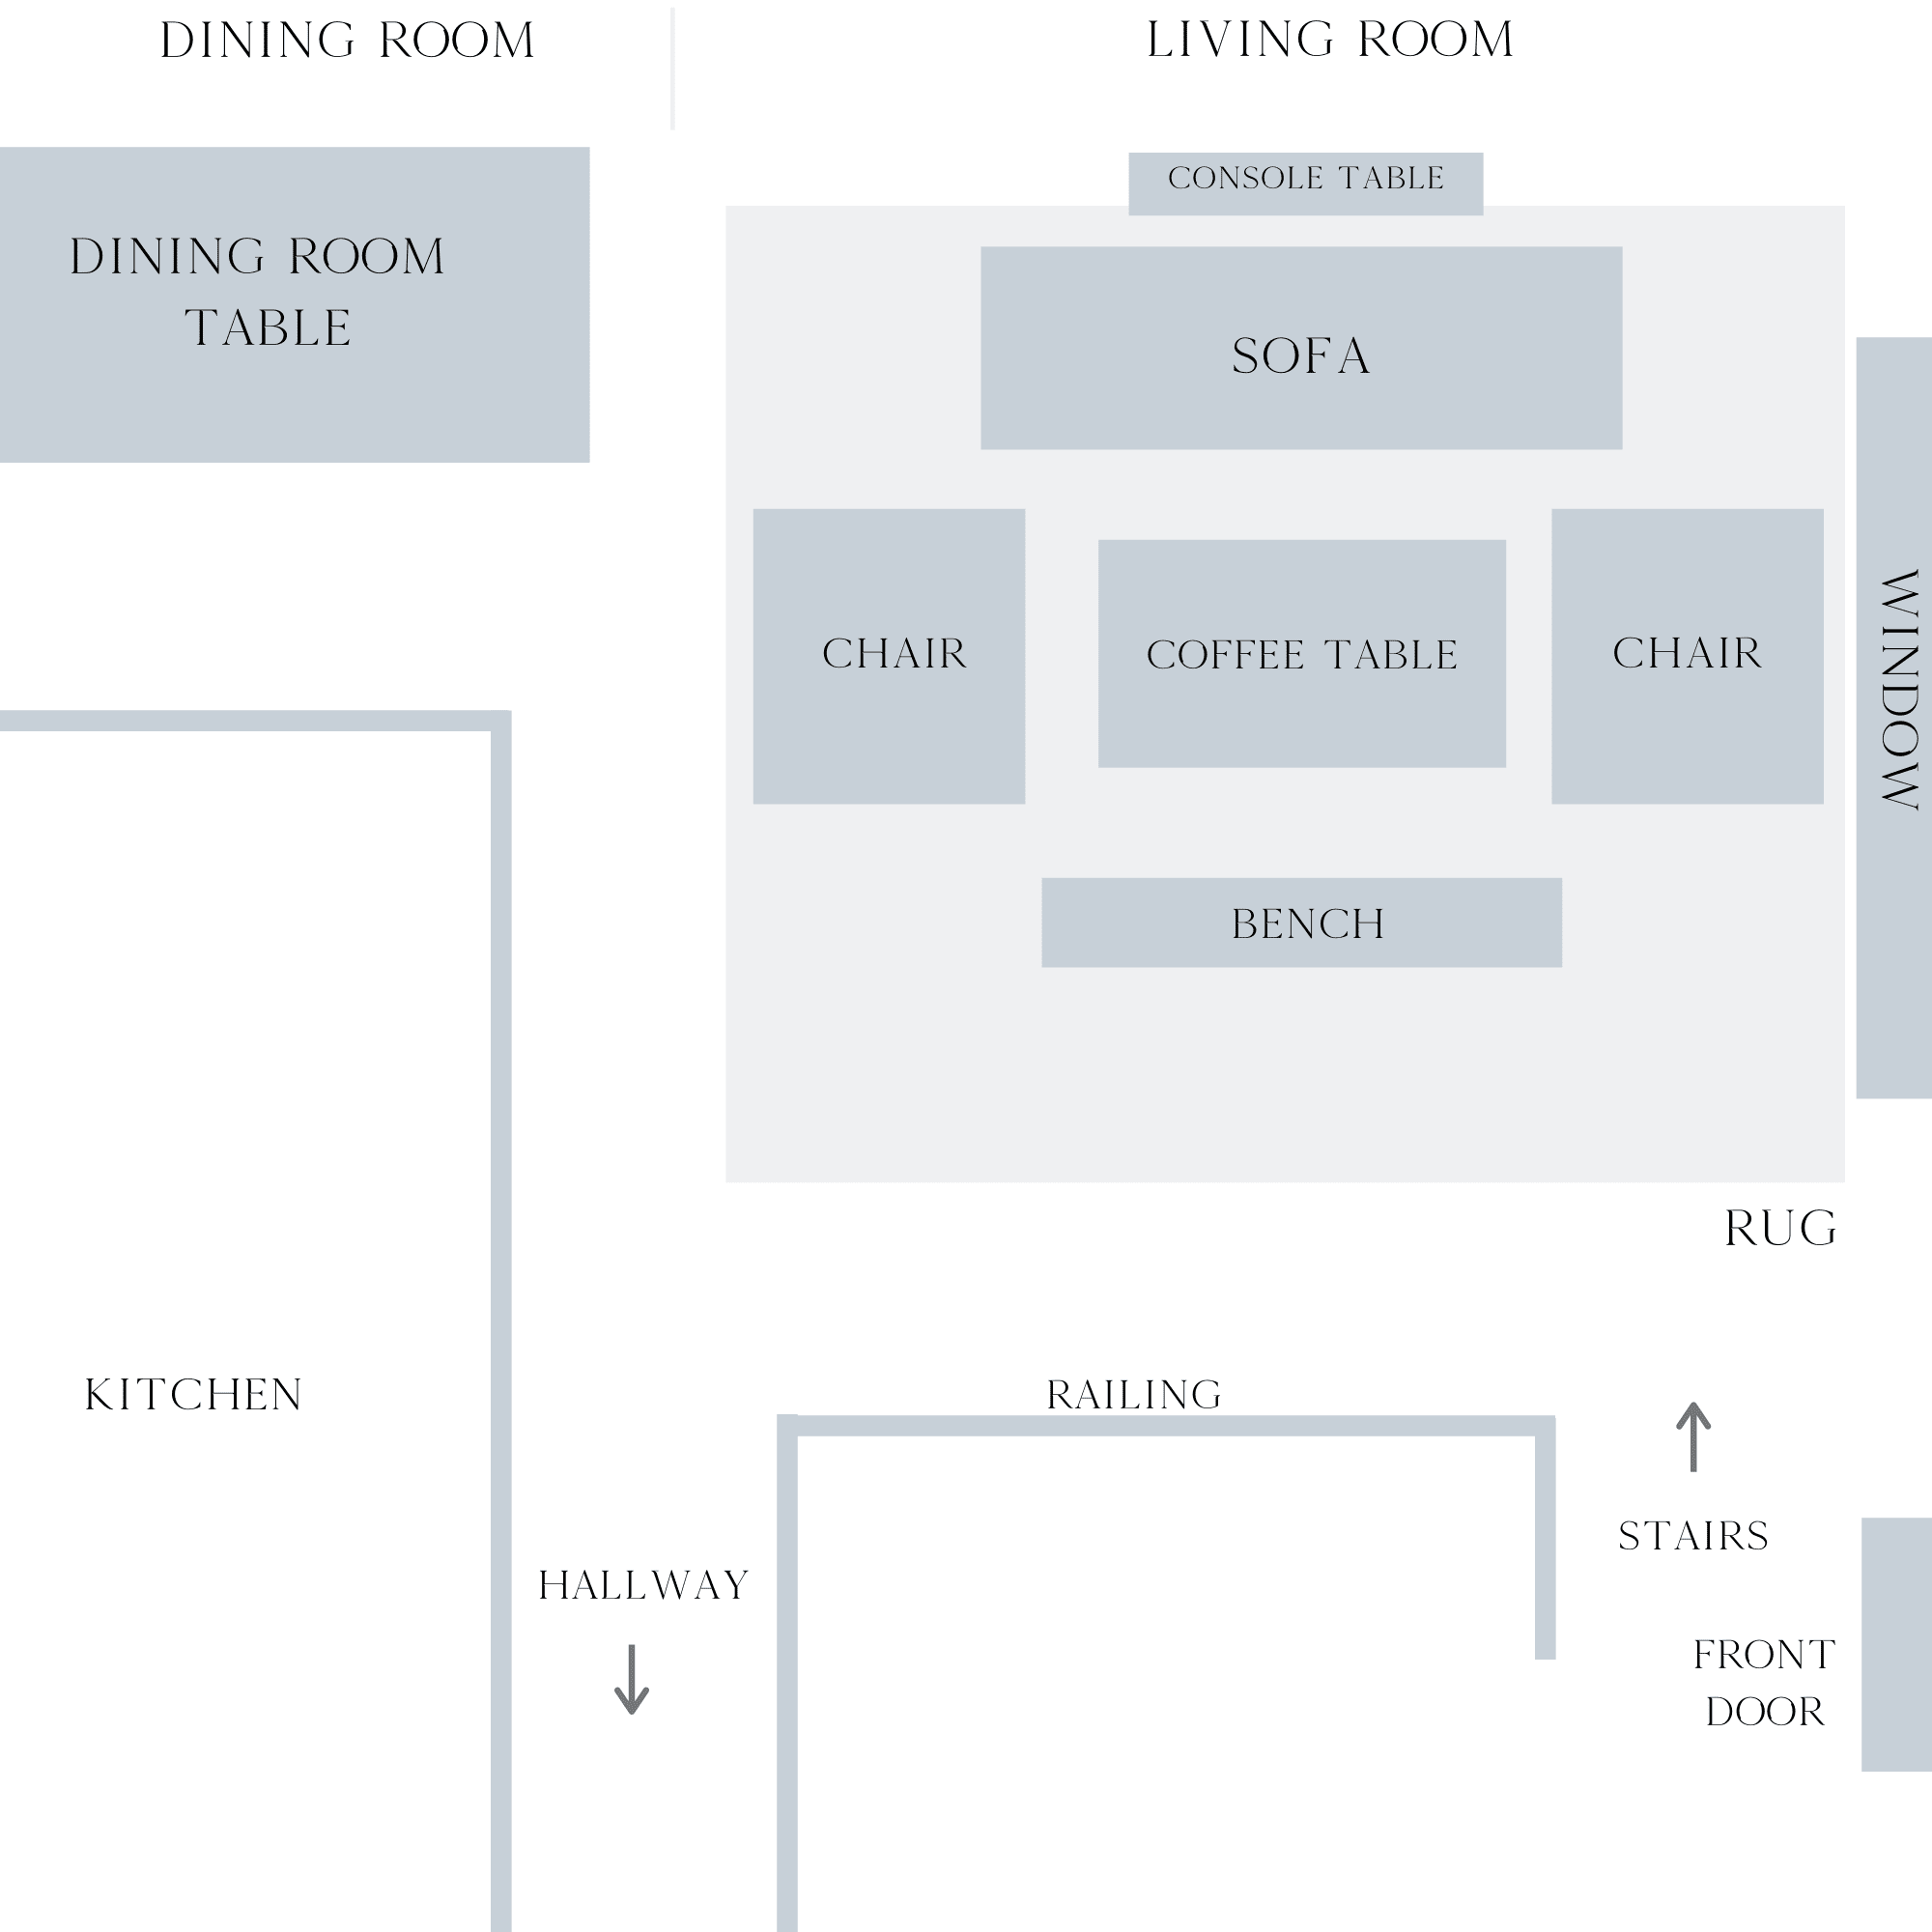 living-room-layout